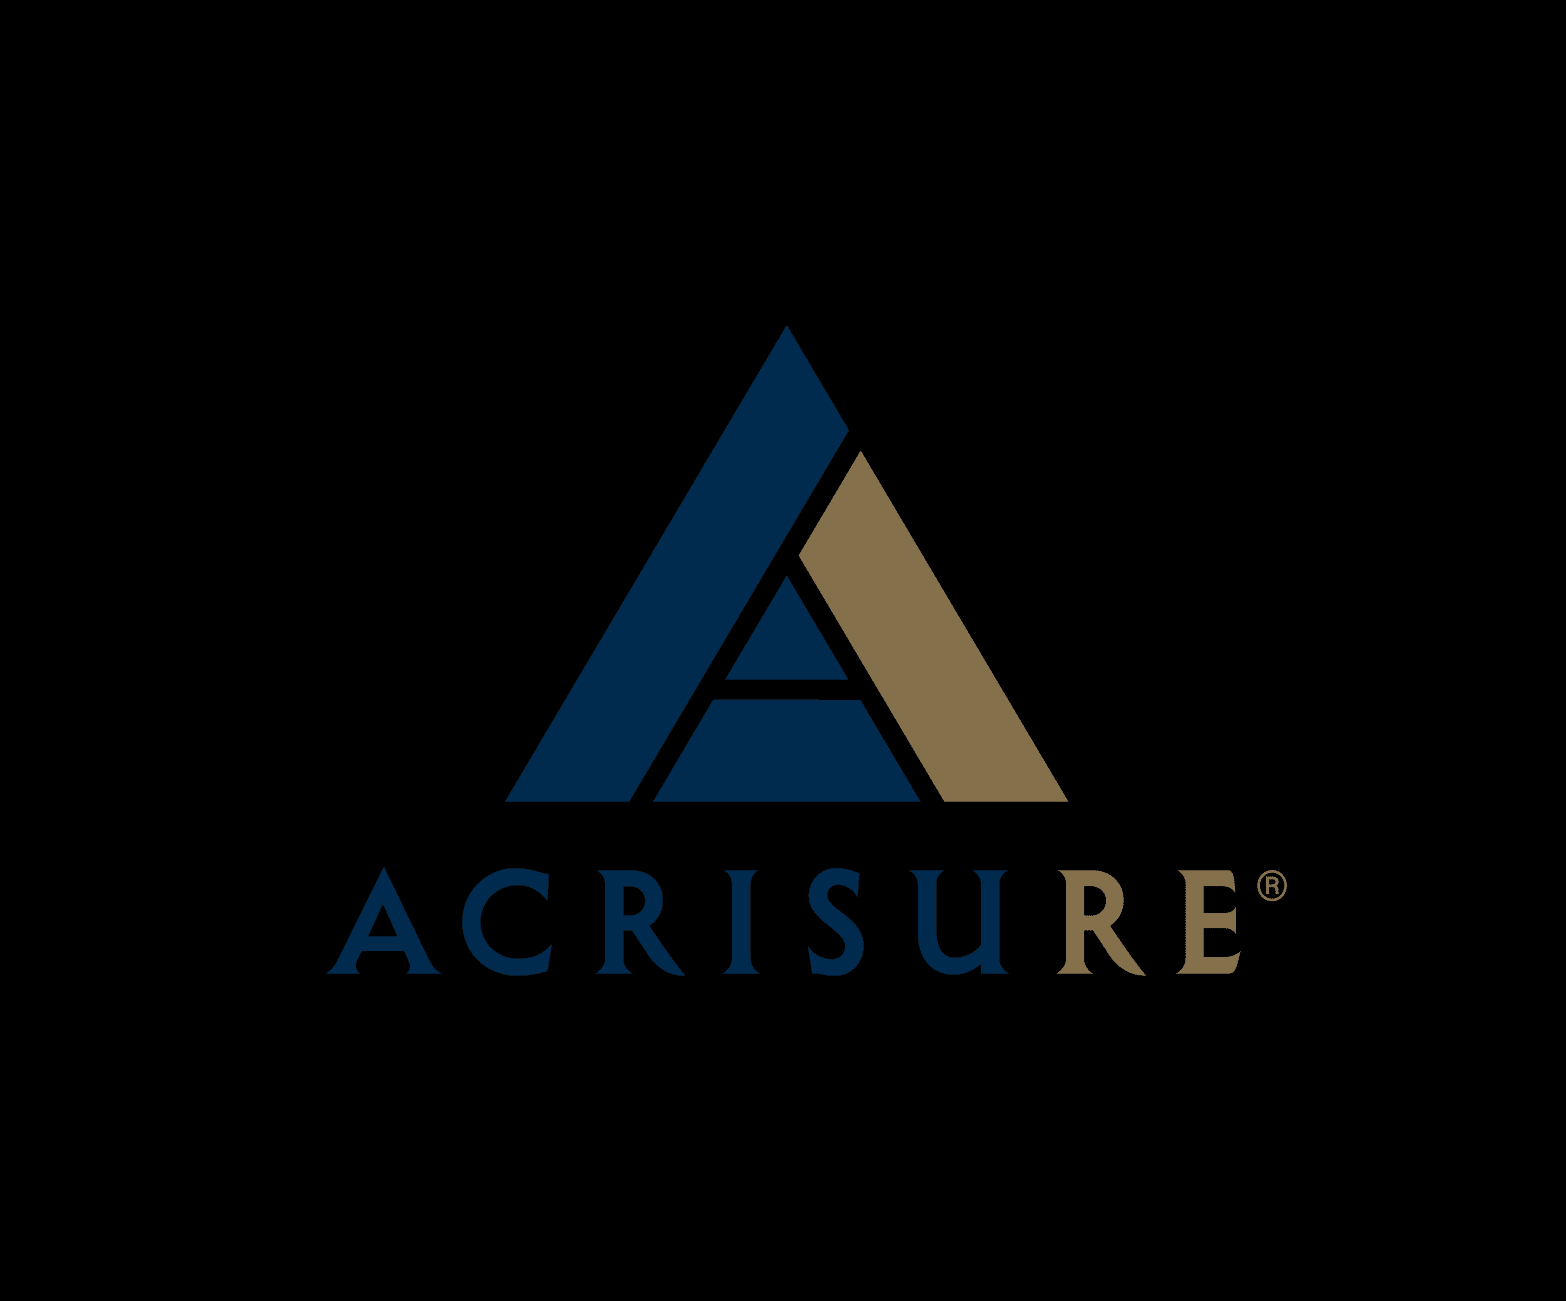 Acrisure Re Appoints Duncan Ainsby to Lead New Asia Facultative Operation